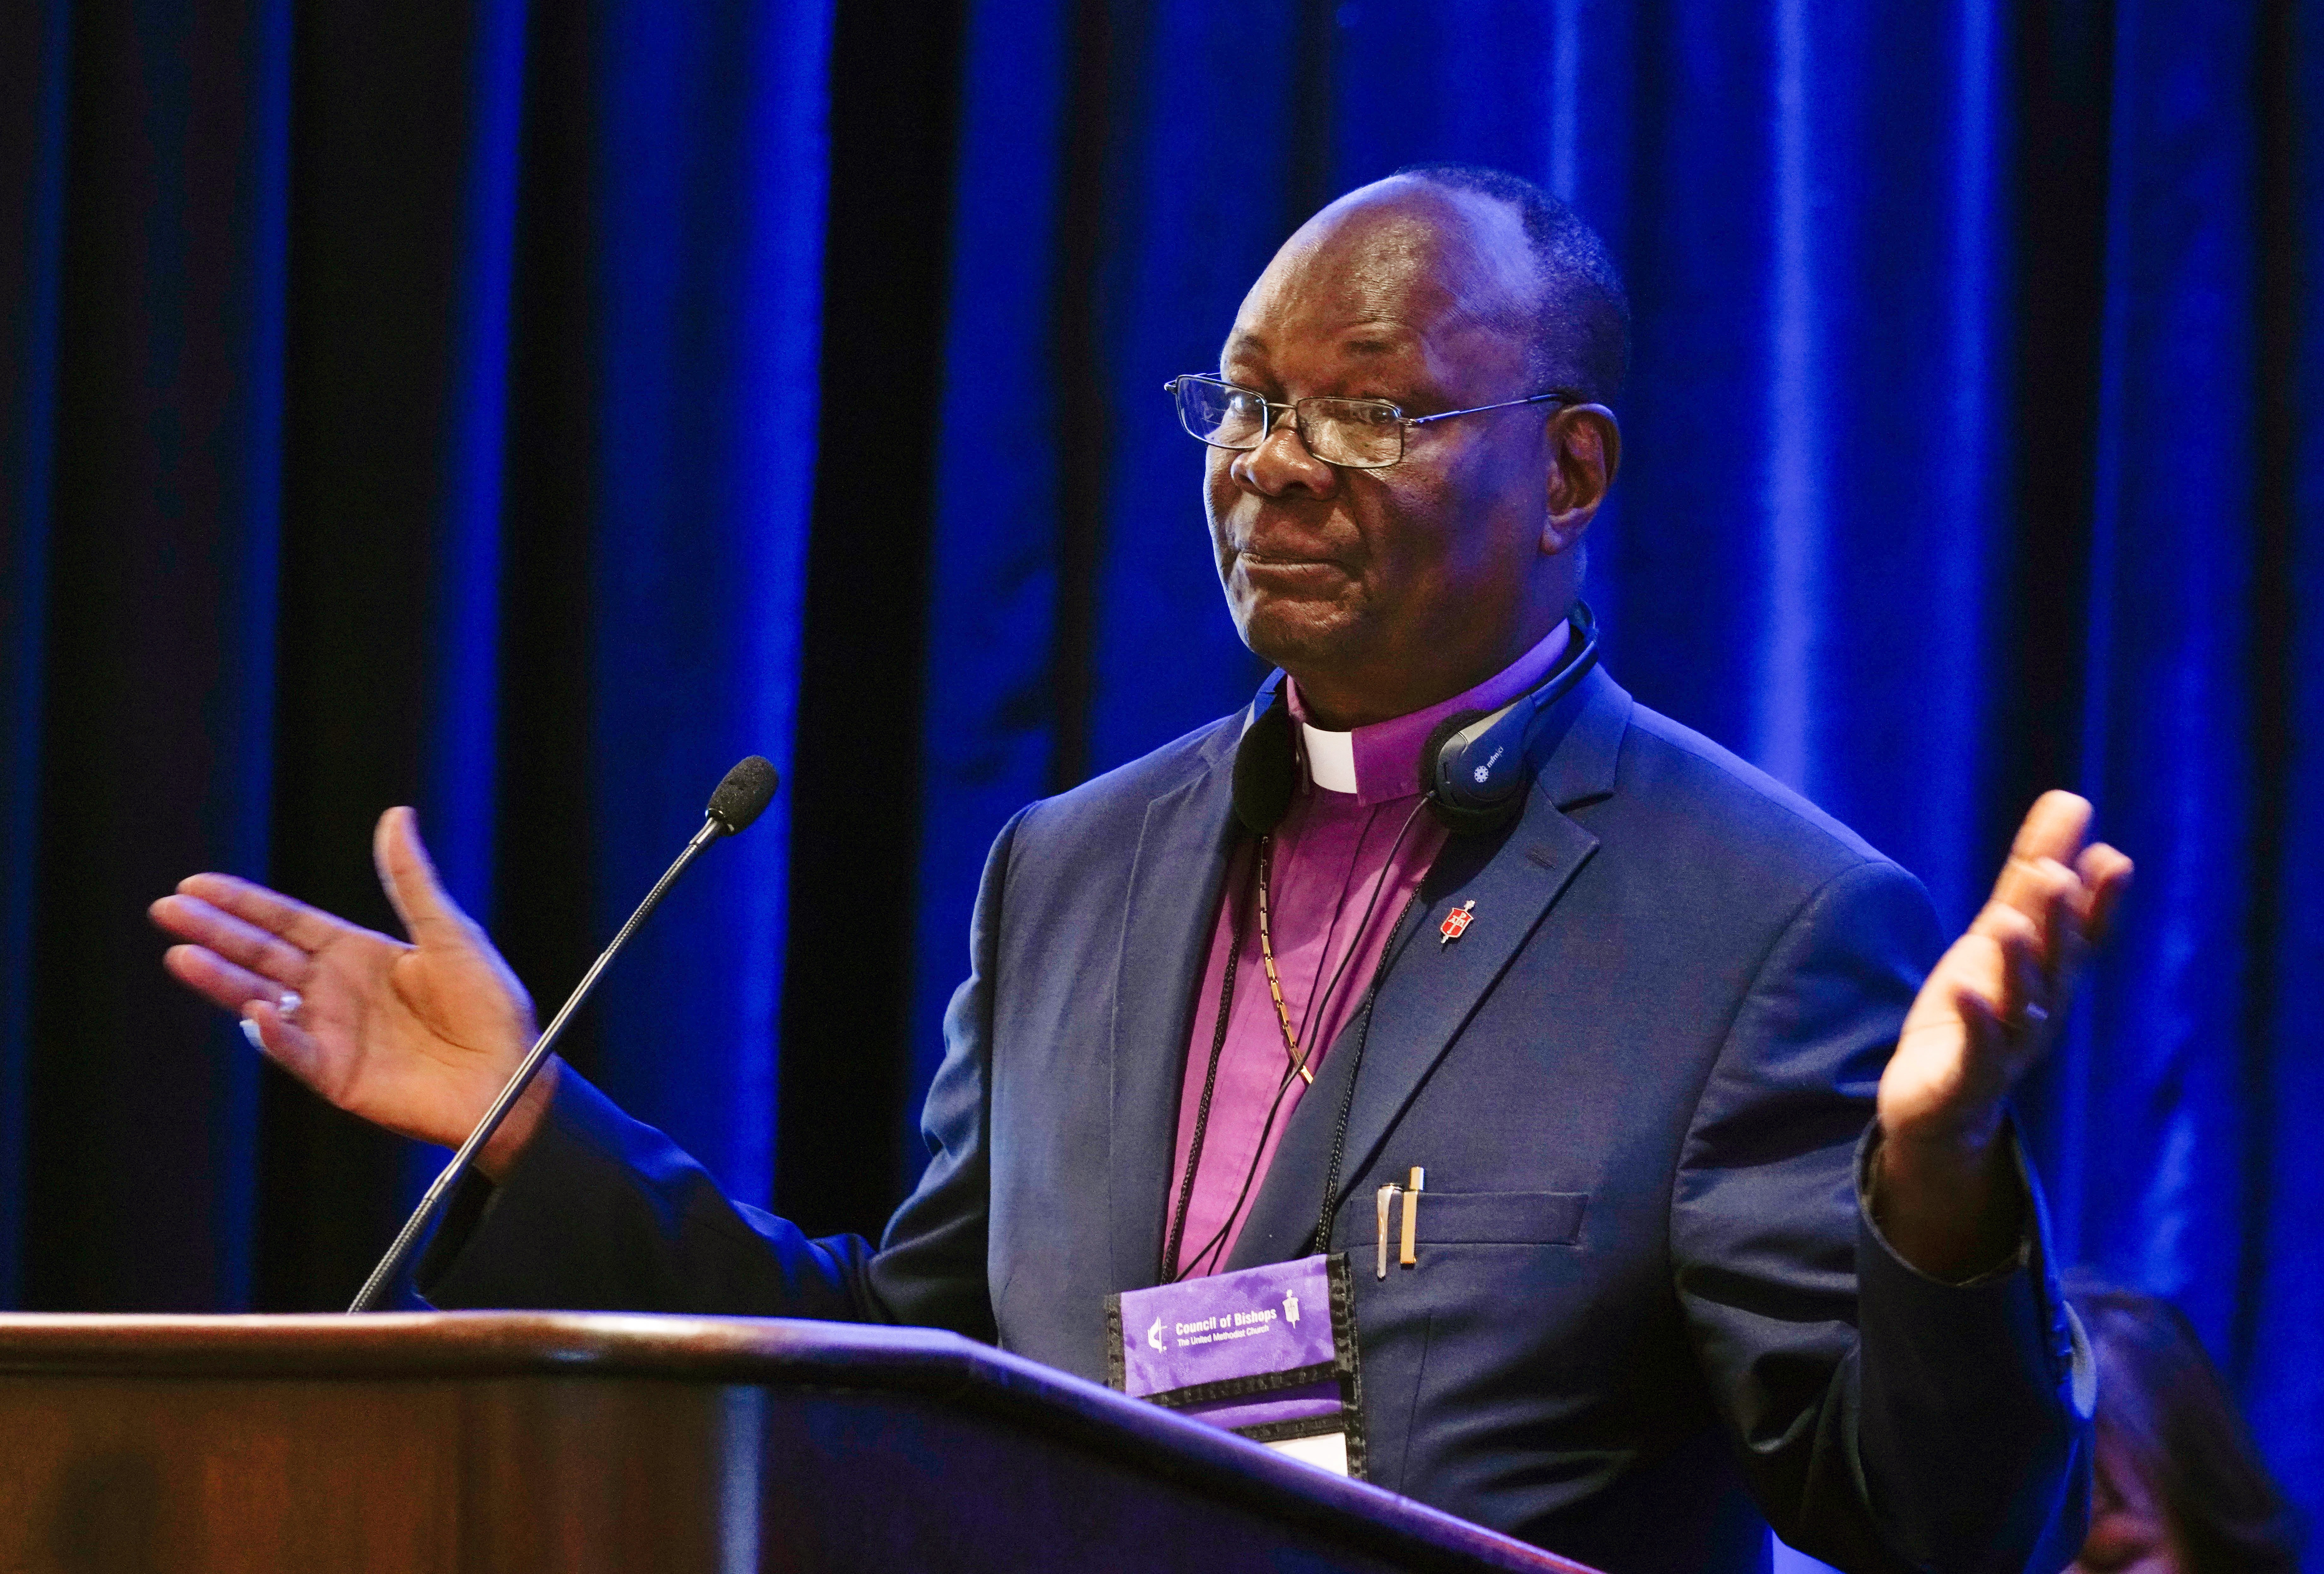 Bishop Gabriel Yemba Unda speaks to his fellow episcopal leaders about the history that has drawn refugees to the Democrat Republic of Congo. Photo by the Rev. Todd Rossnagel, Louisiana Conference.